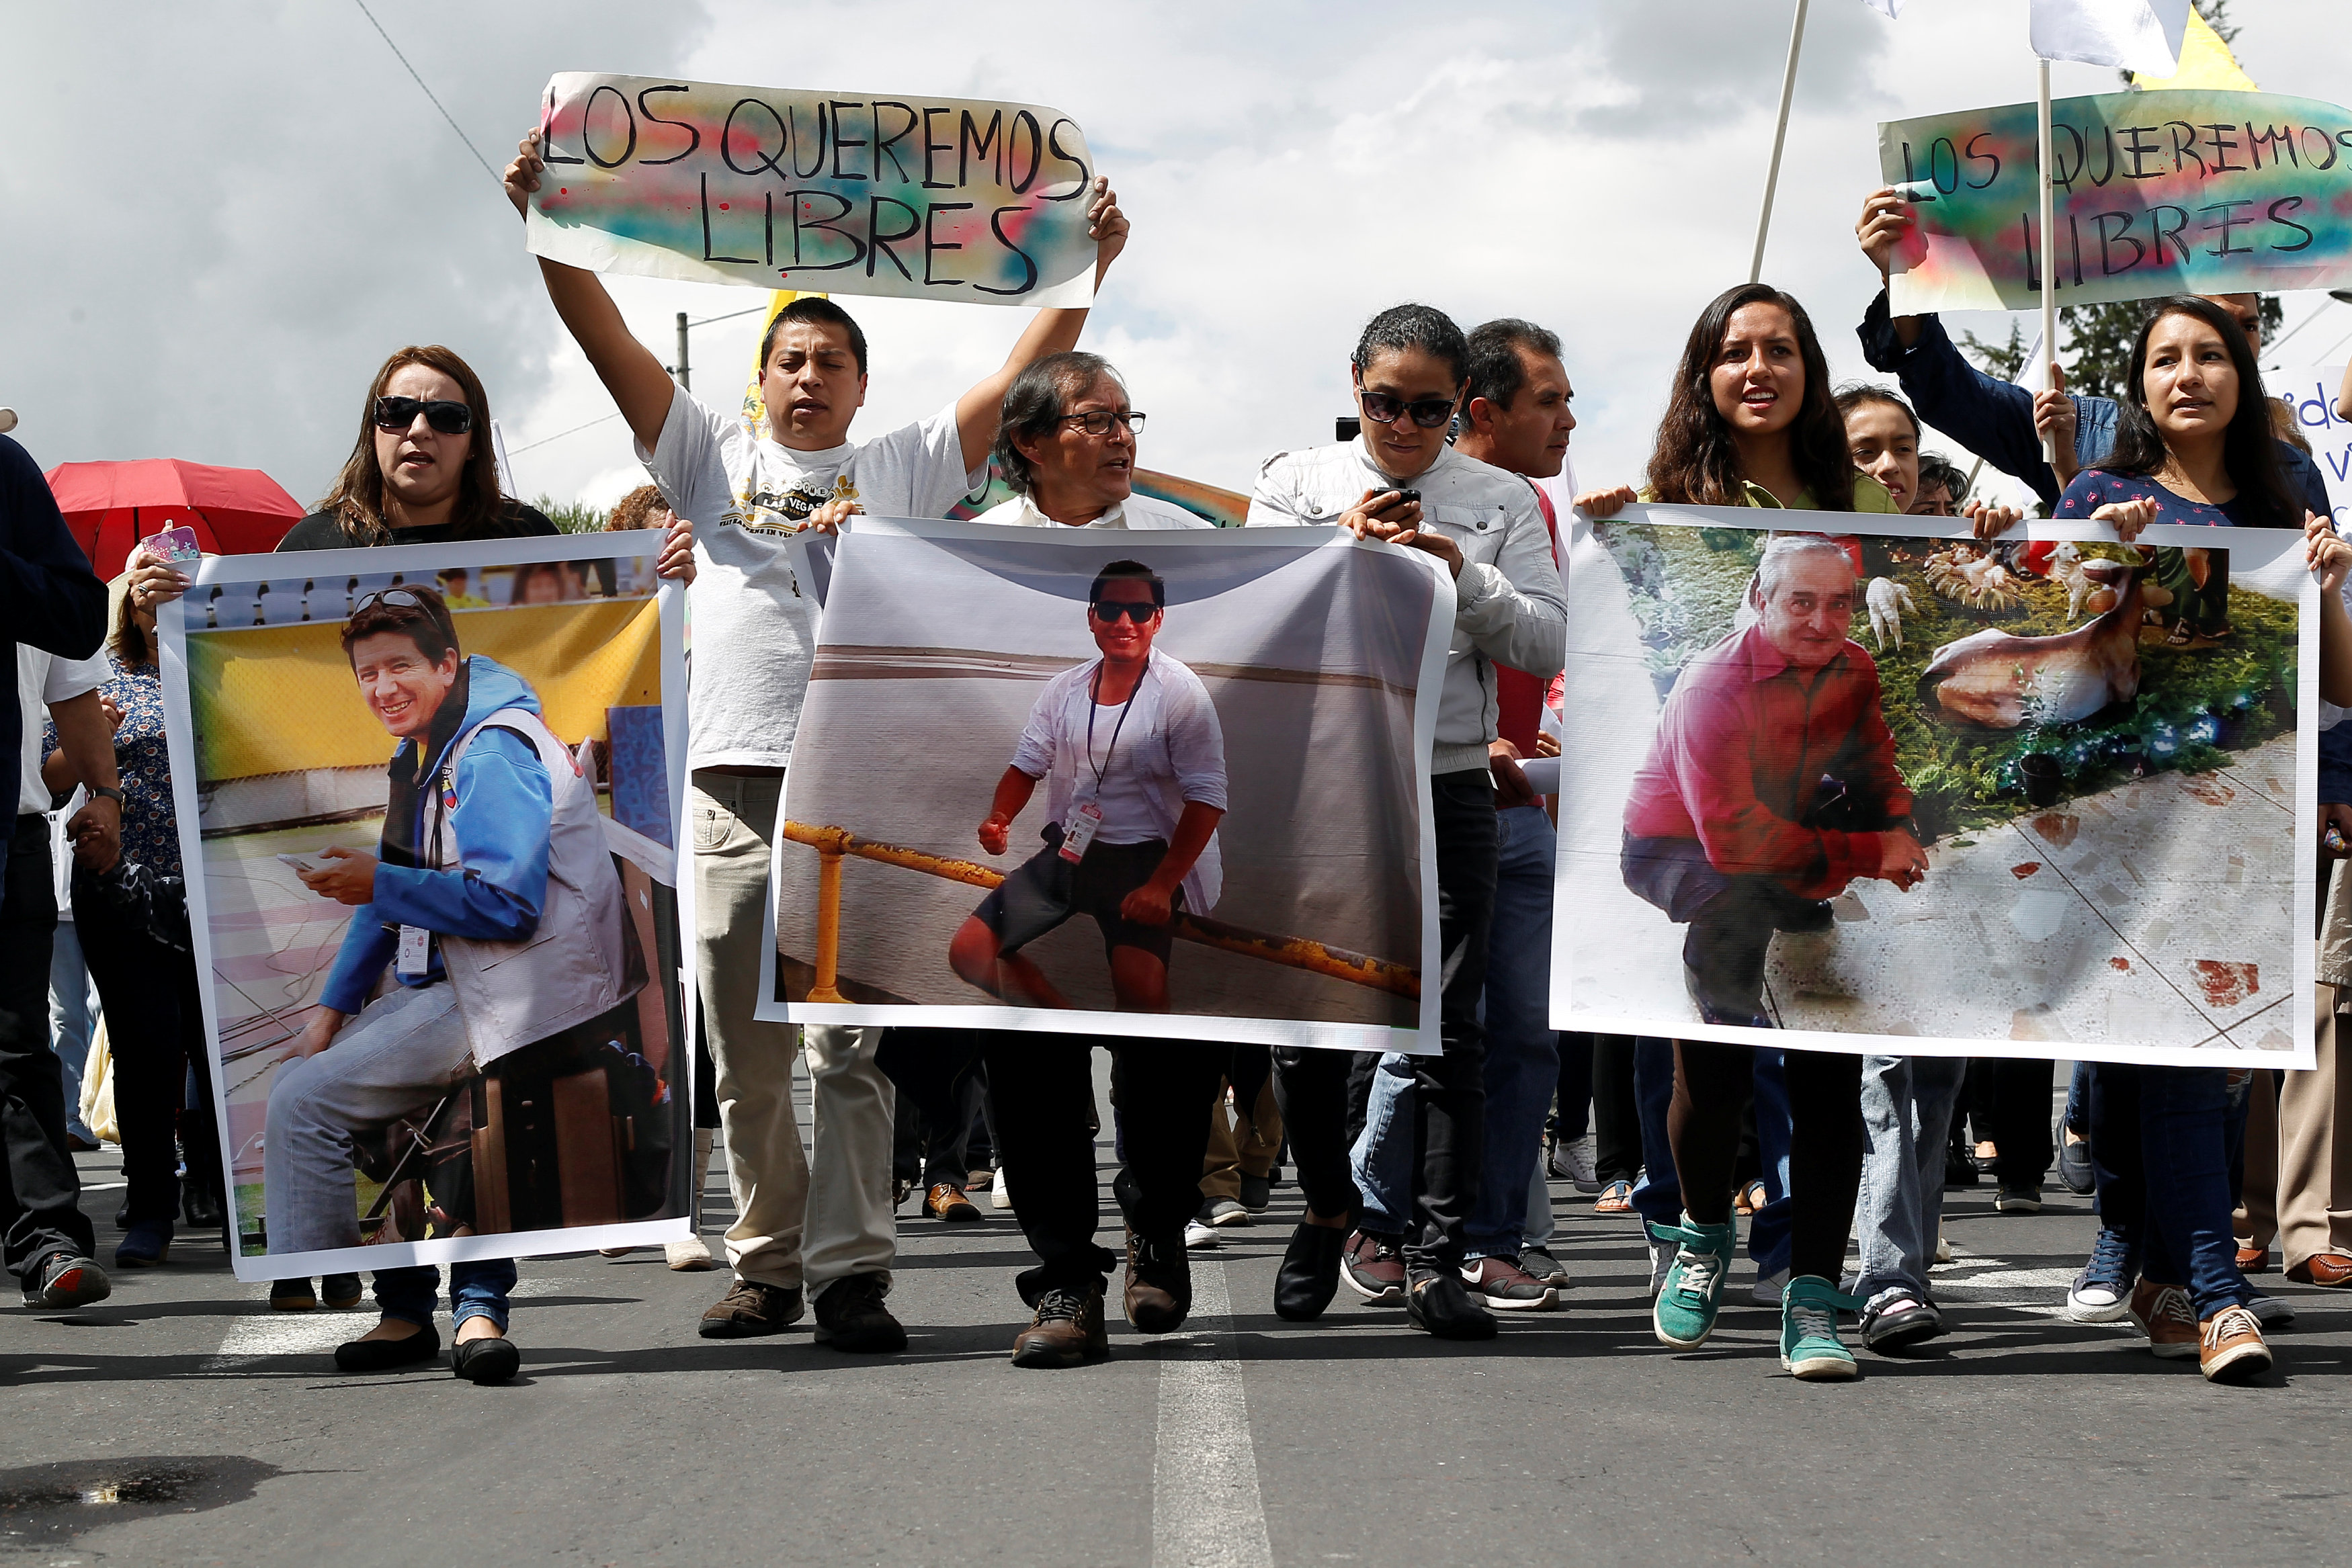 Relatives and friends hold pictures of Ecuadorean photojournalist Paul Rivas (left), journalist Javier Ortega (center) and their driver Efrain Segarra during a protest march to demand their release, in Quito, Ecuador April 1, 2018.